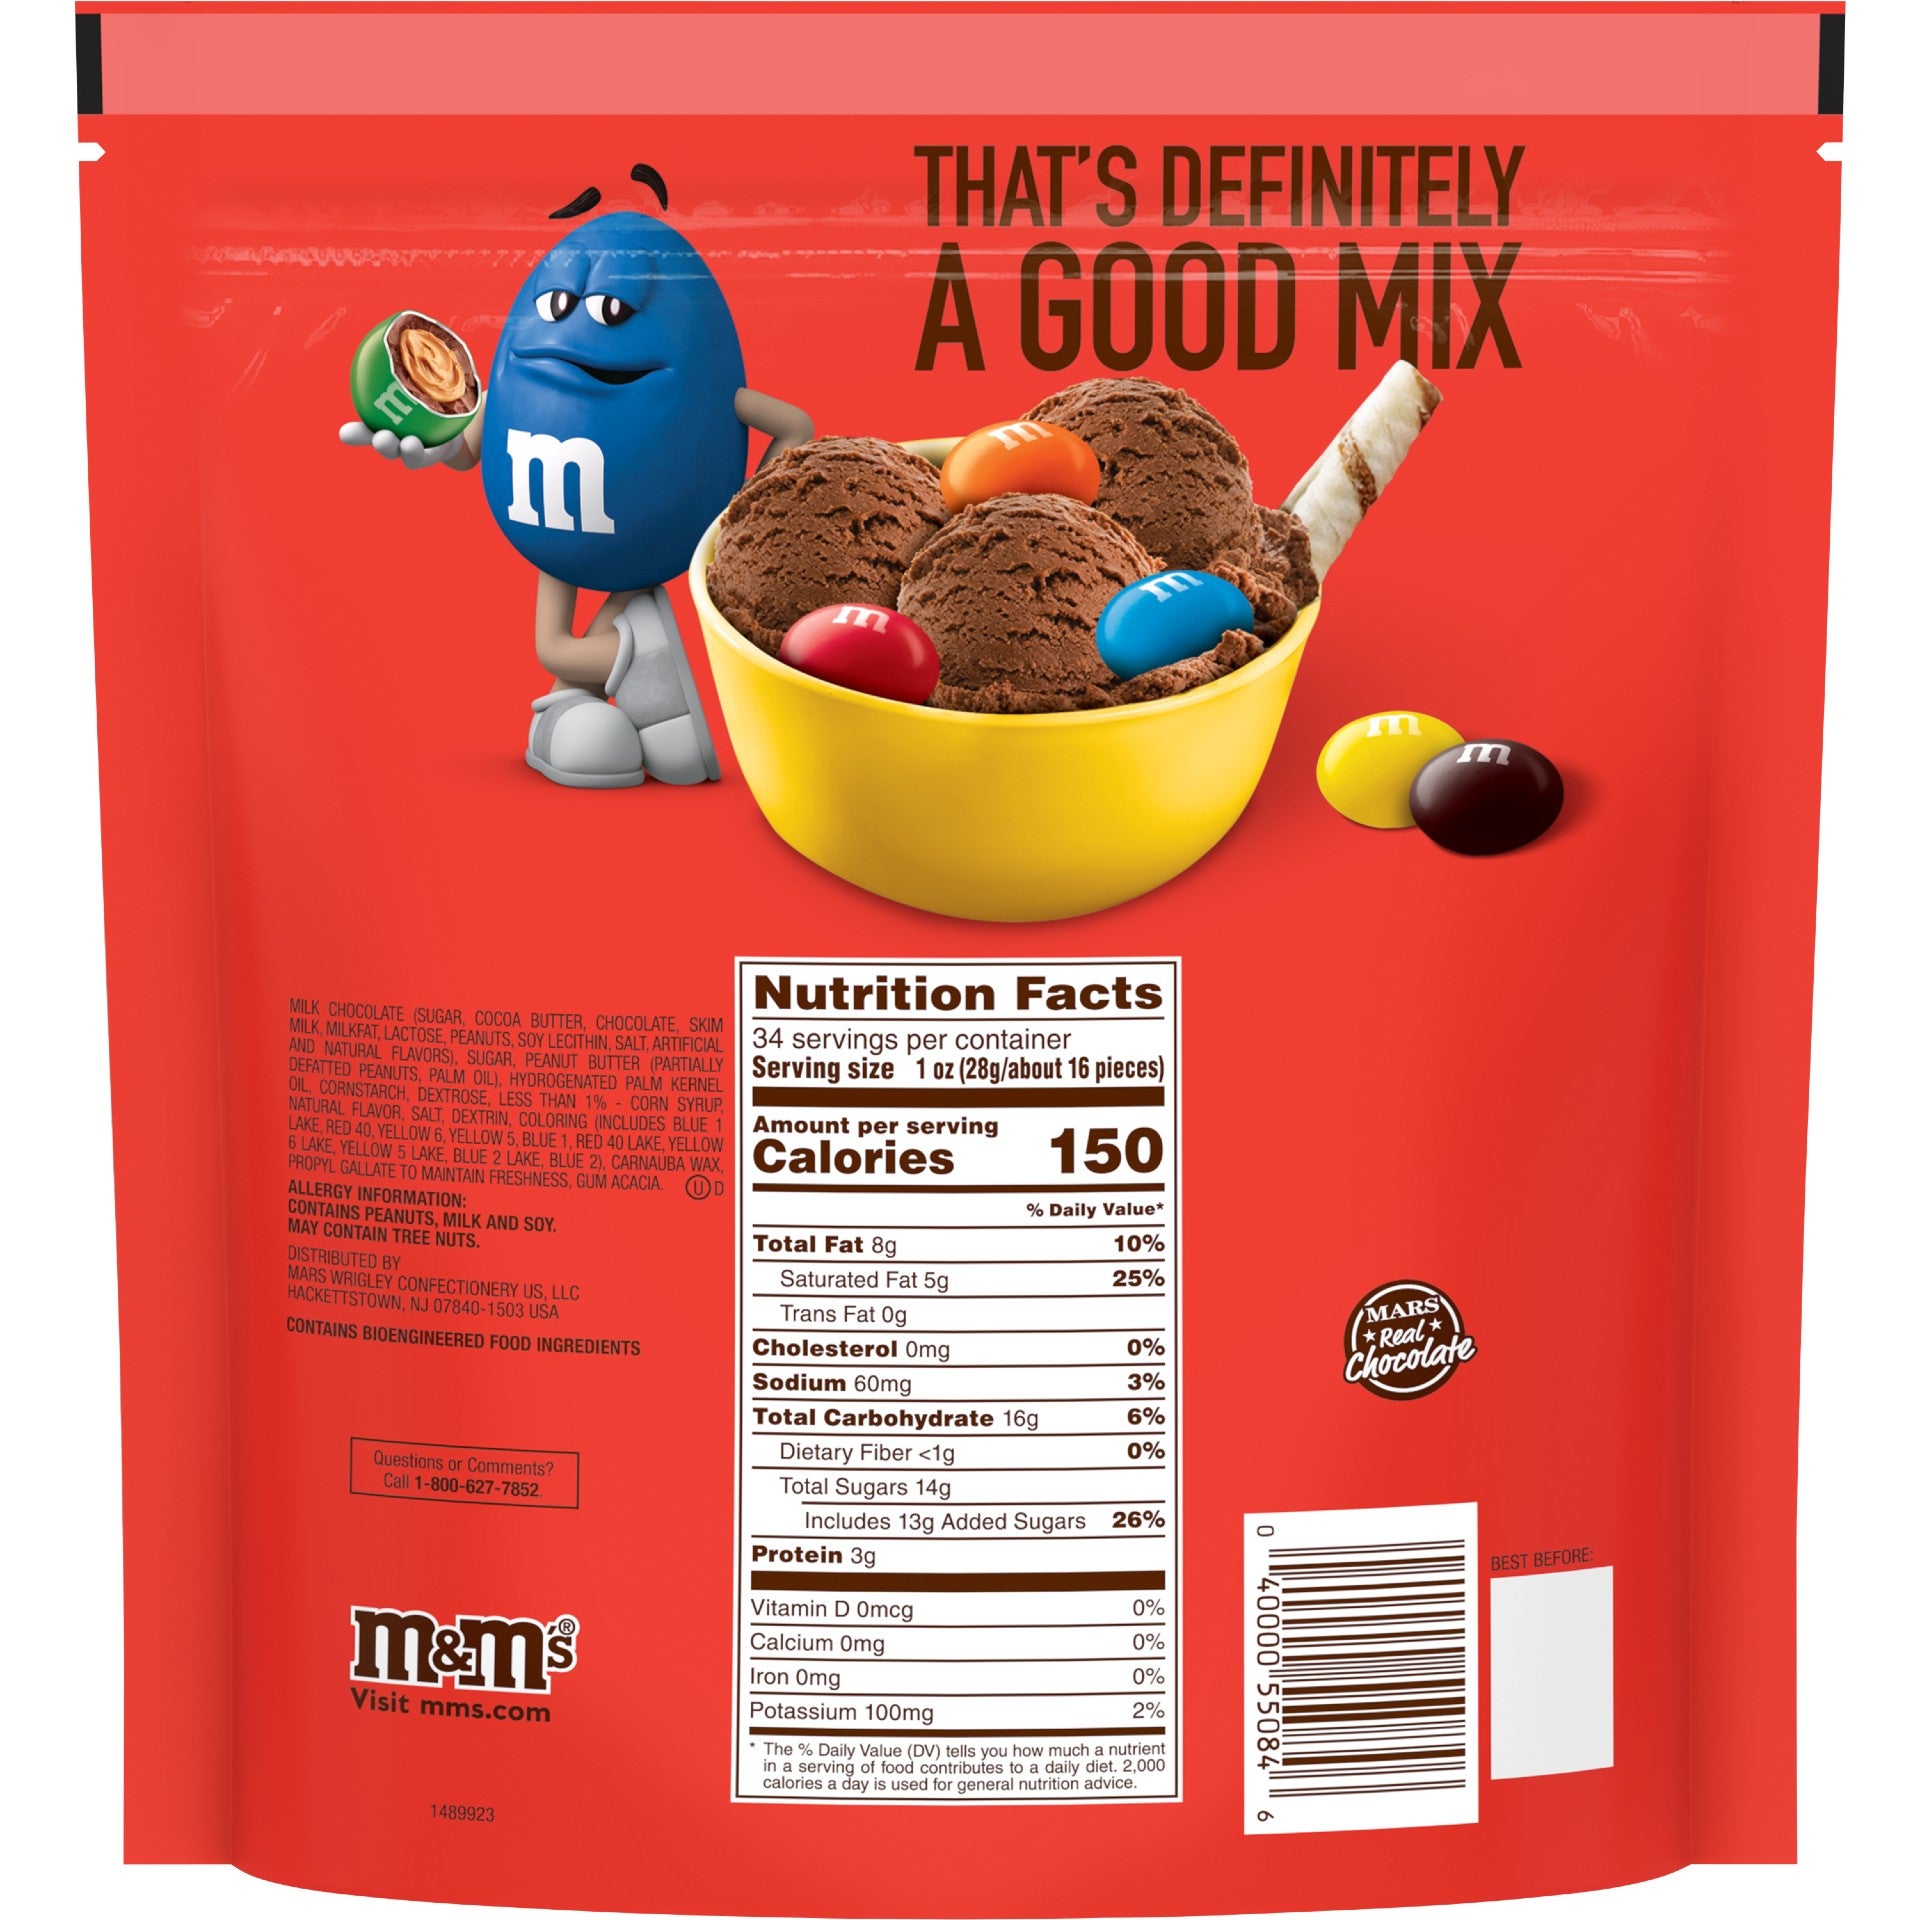 M&M's Peanut Butter Chocolate Candies Party Size - 34-oz. Resealable Bag